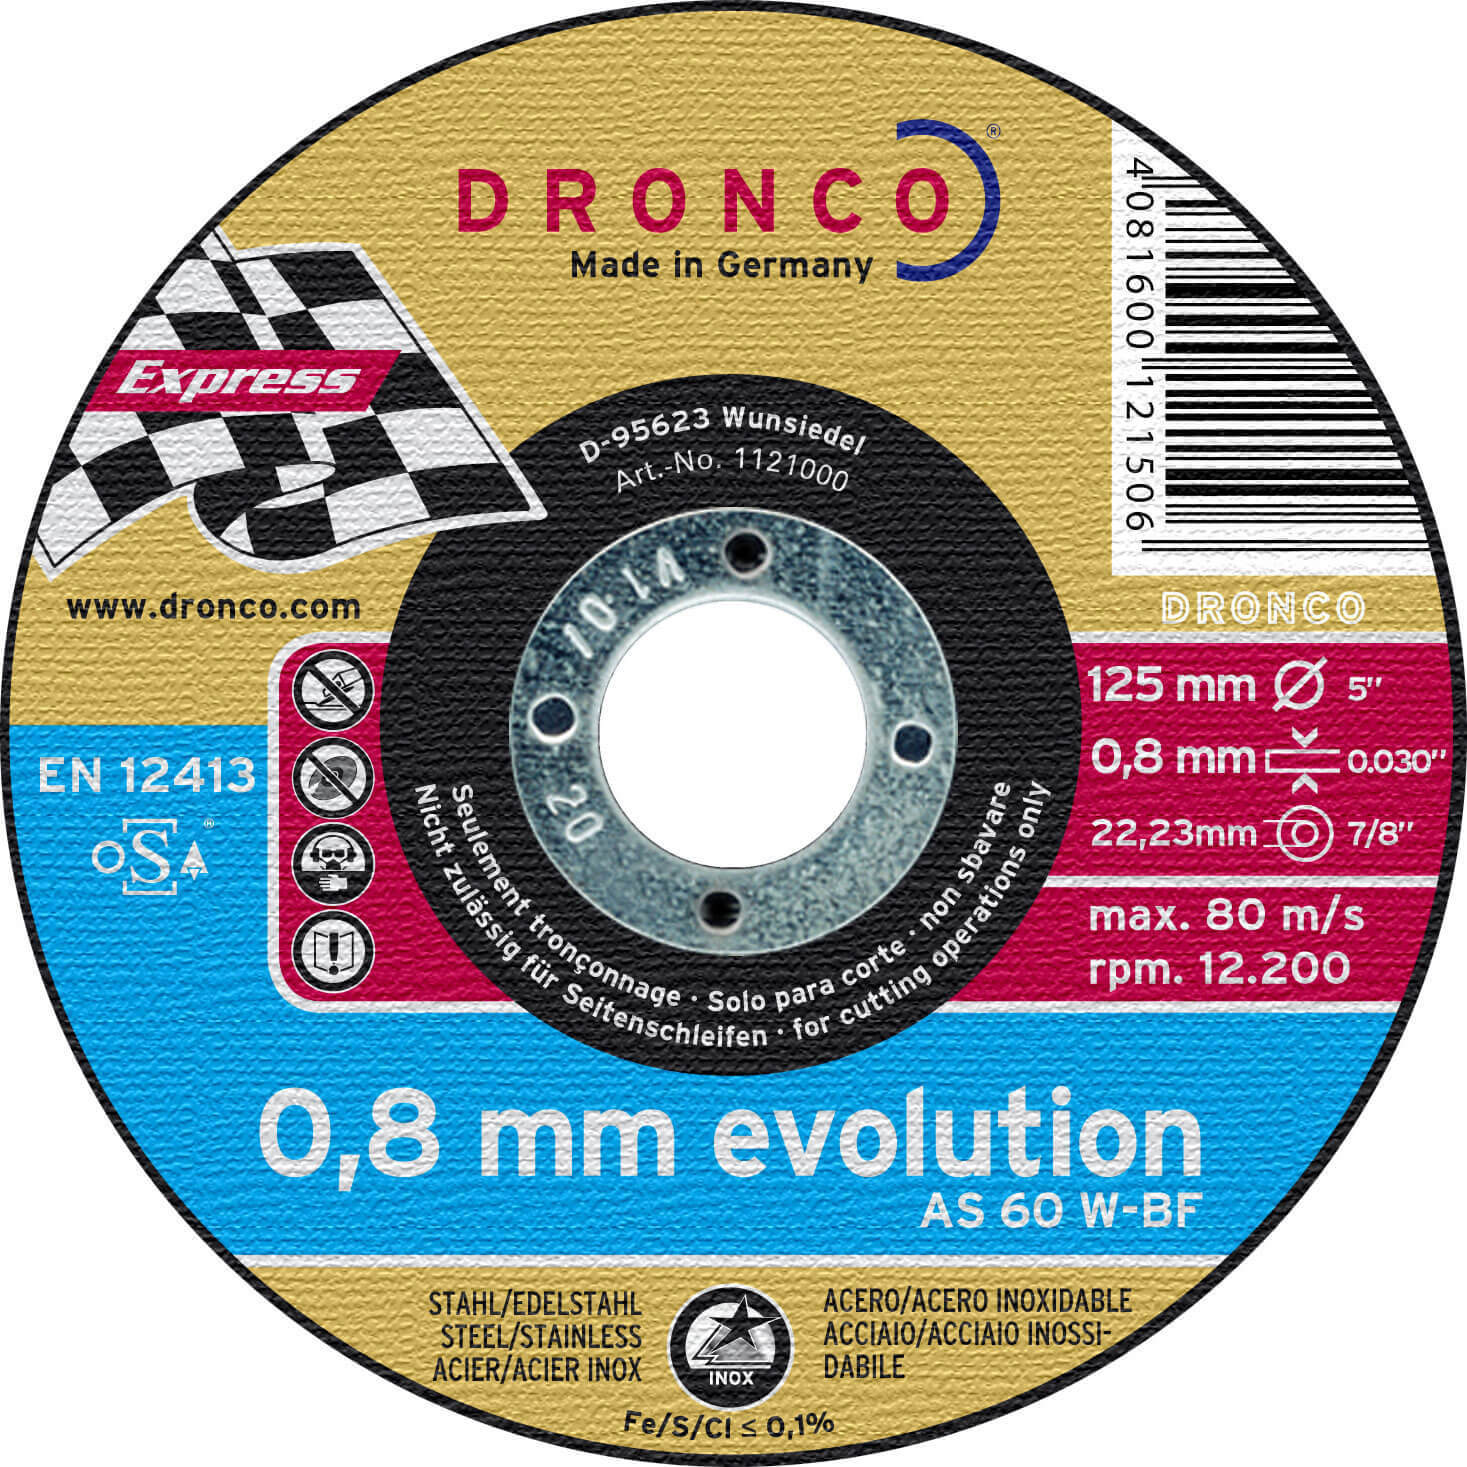 Dronco AS 60 W EVOLUTION 115mm x 0.8mm x 22.2mm Bore Angle Grinder Cutting Discs for All Steel & She